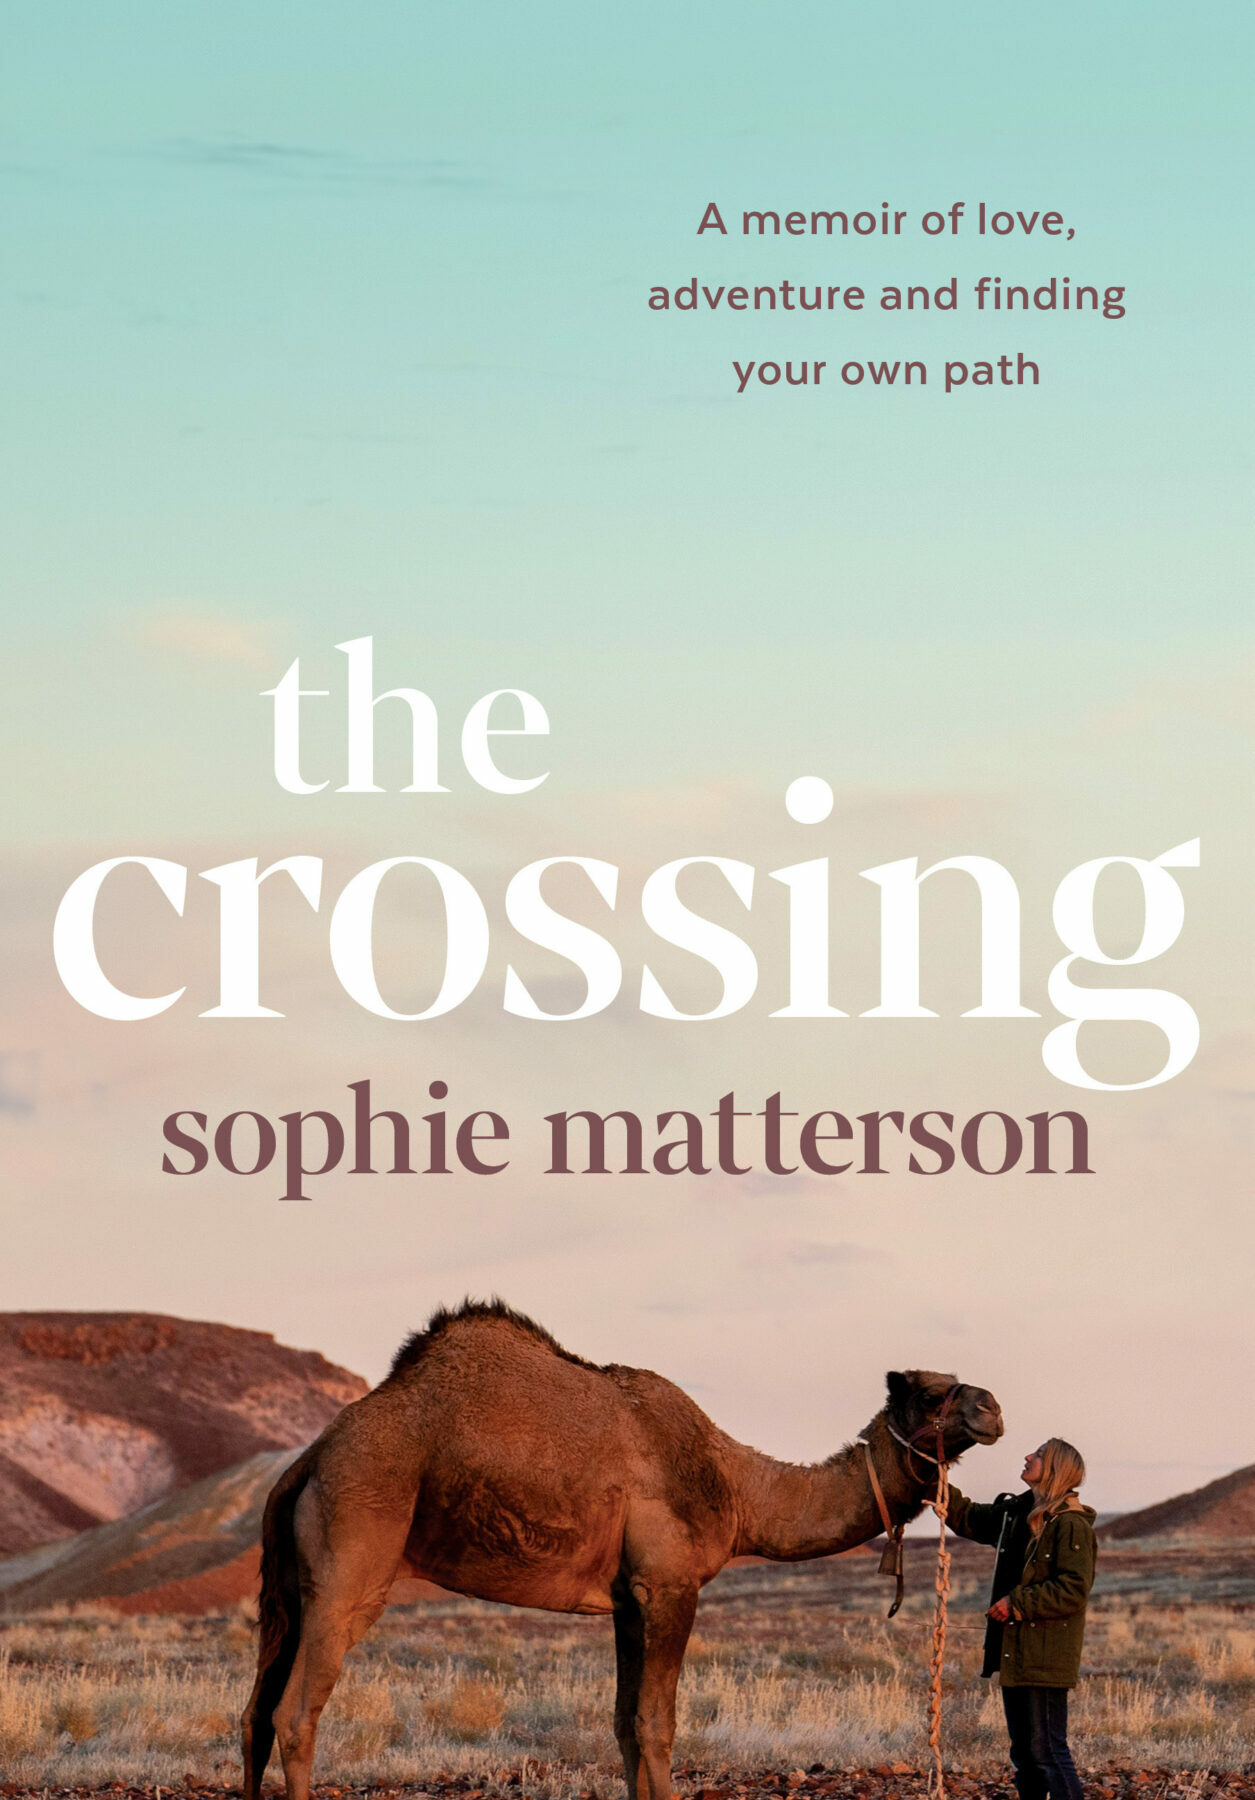 A book cover featuring a woman and a camel in a grassy landscape and the title in white lettering in the sky